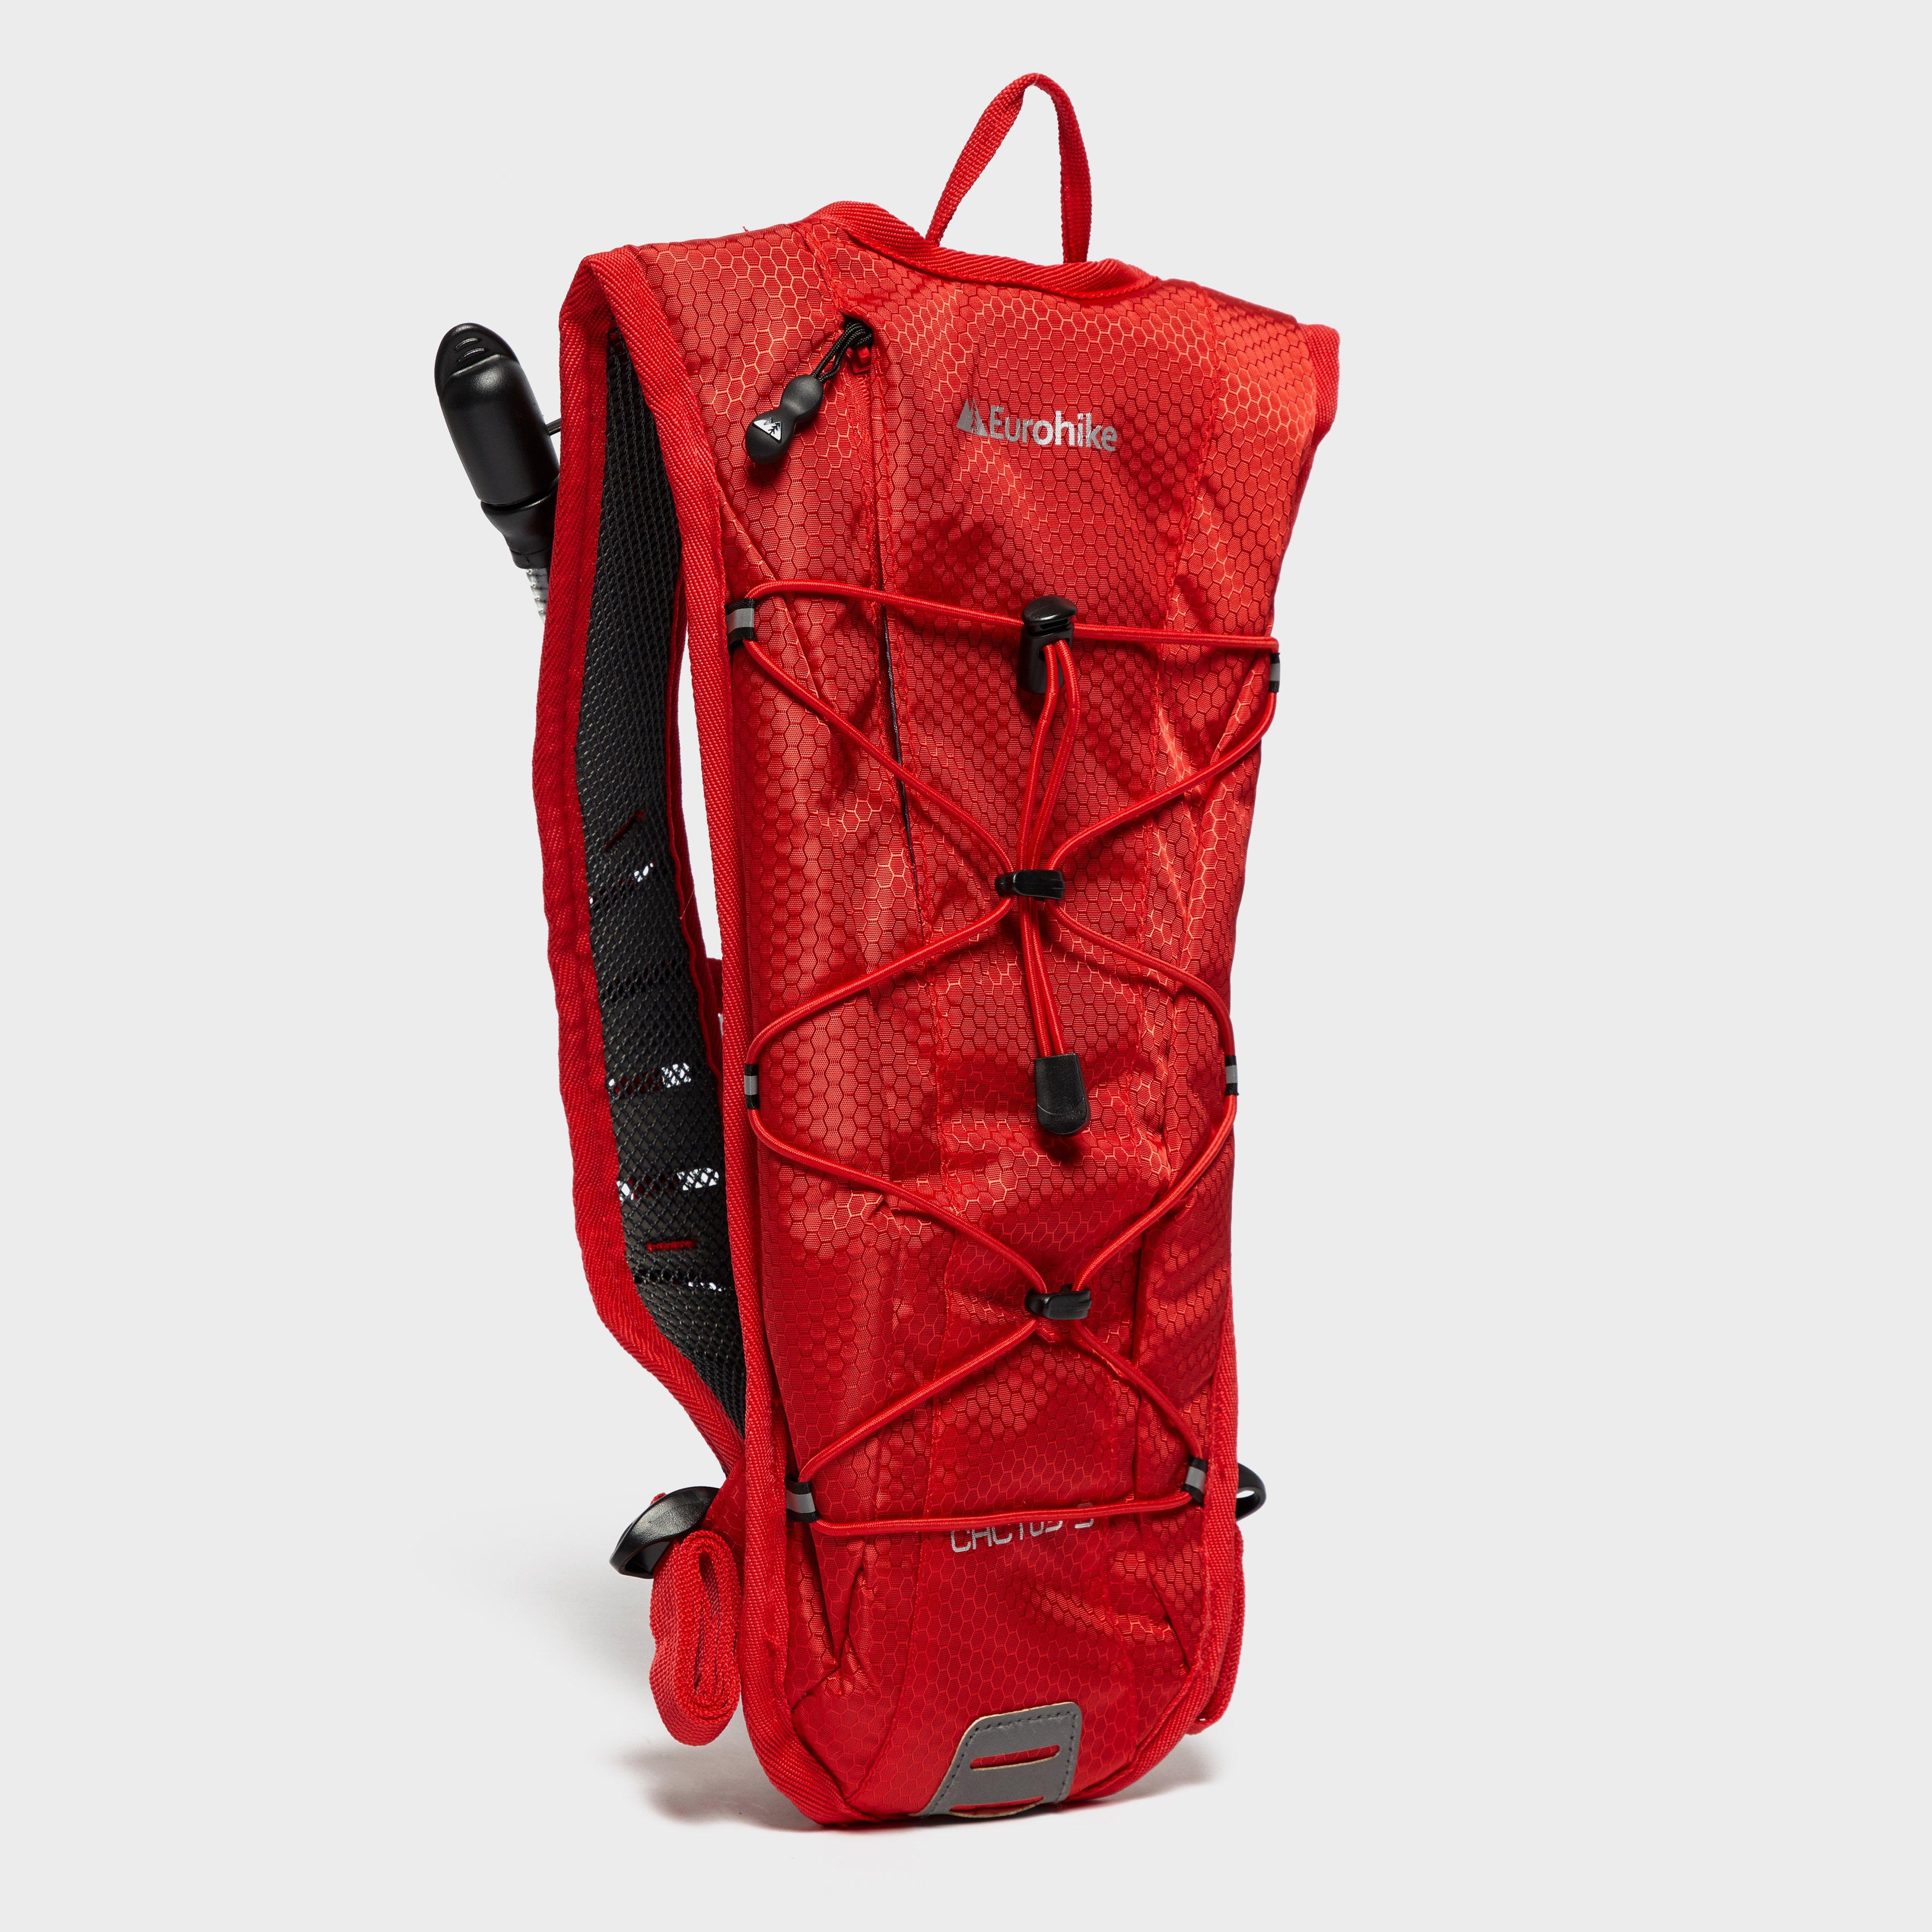 Image of Eurohike Cactus 3L Hydration Pack - Red/Red, RED/RED